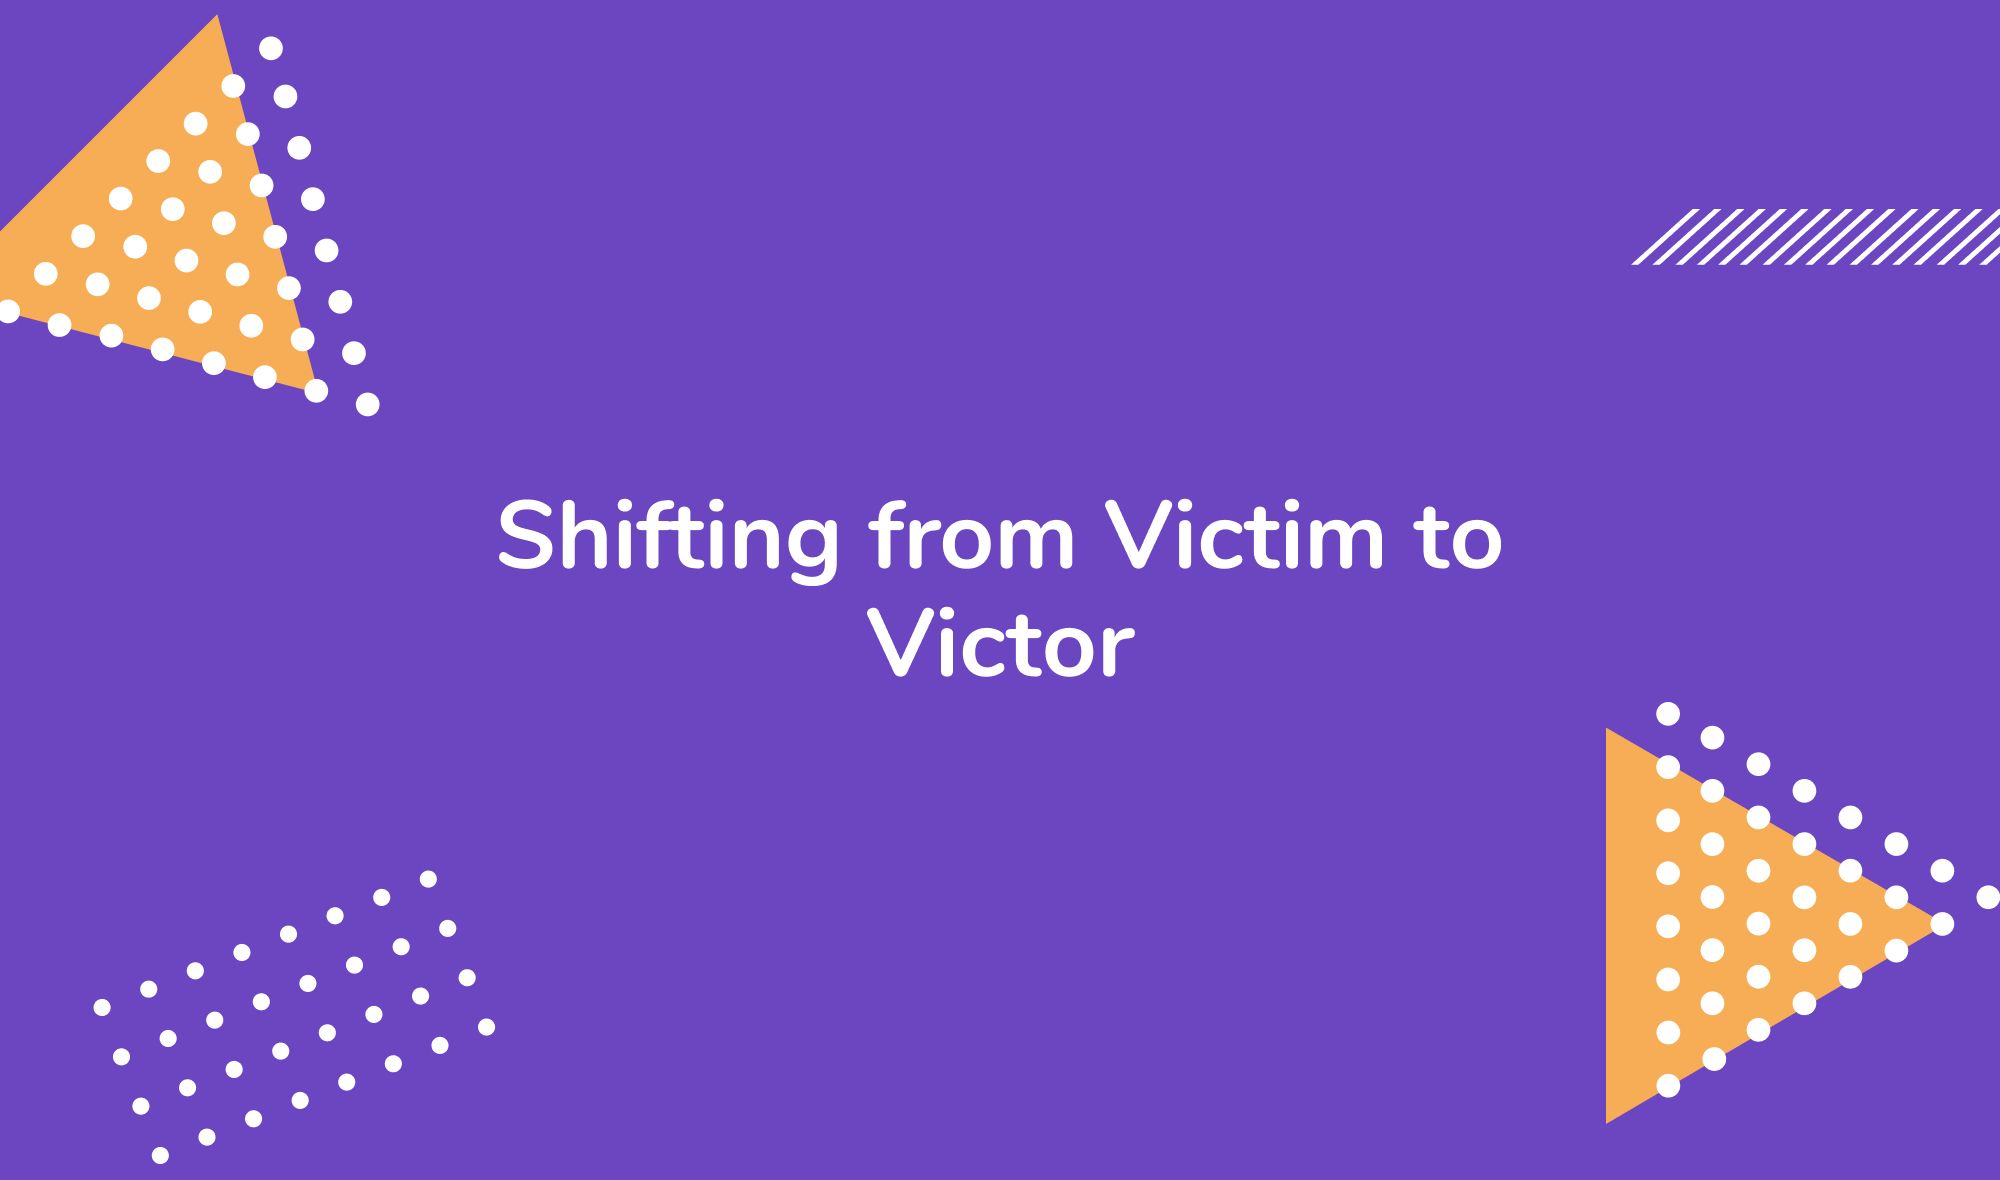 Shifting from Victim to Victor: The Opposite of Victim